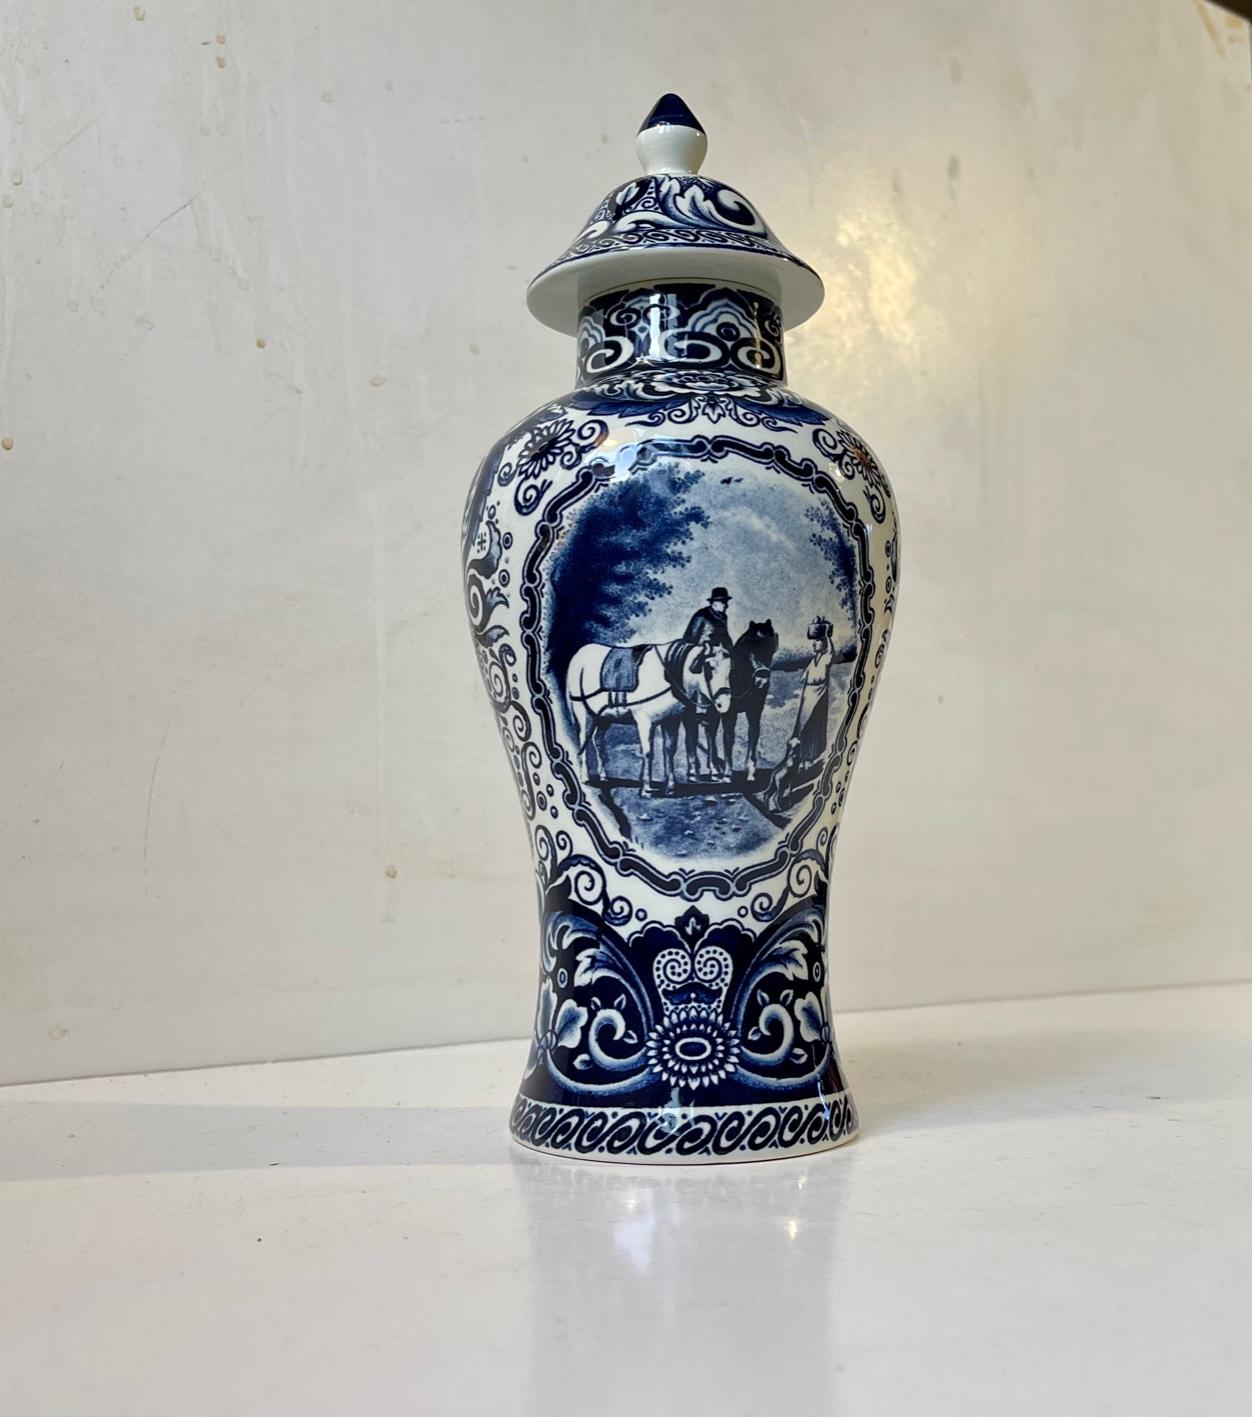 Romantic blue Delft porcelain lidded vase or urn with idyllic horse scene. Decorated with flowers, leaves and ornaments derived from Dutch Colonial style. Measurements: H: 25 cm, Diameter: 11 cm.